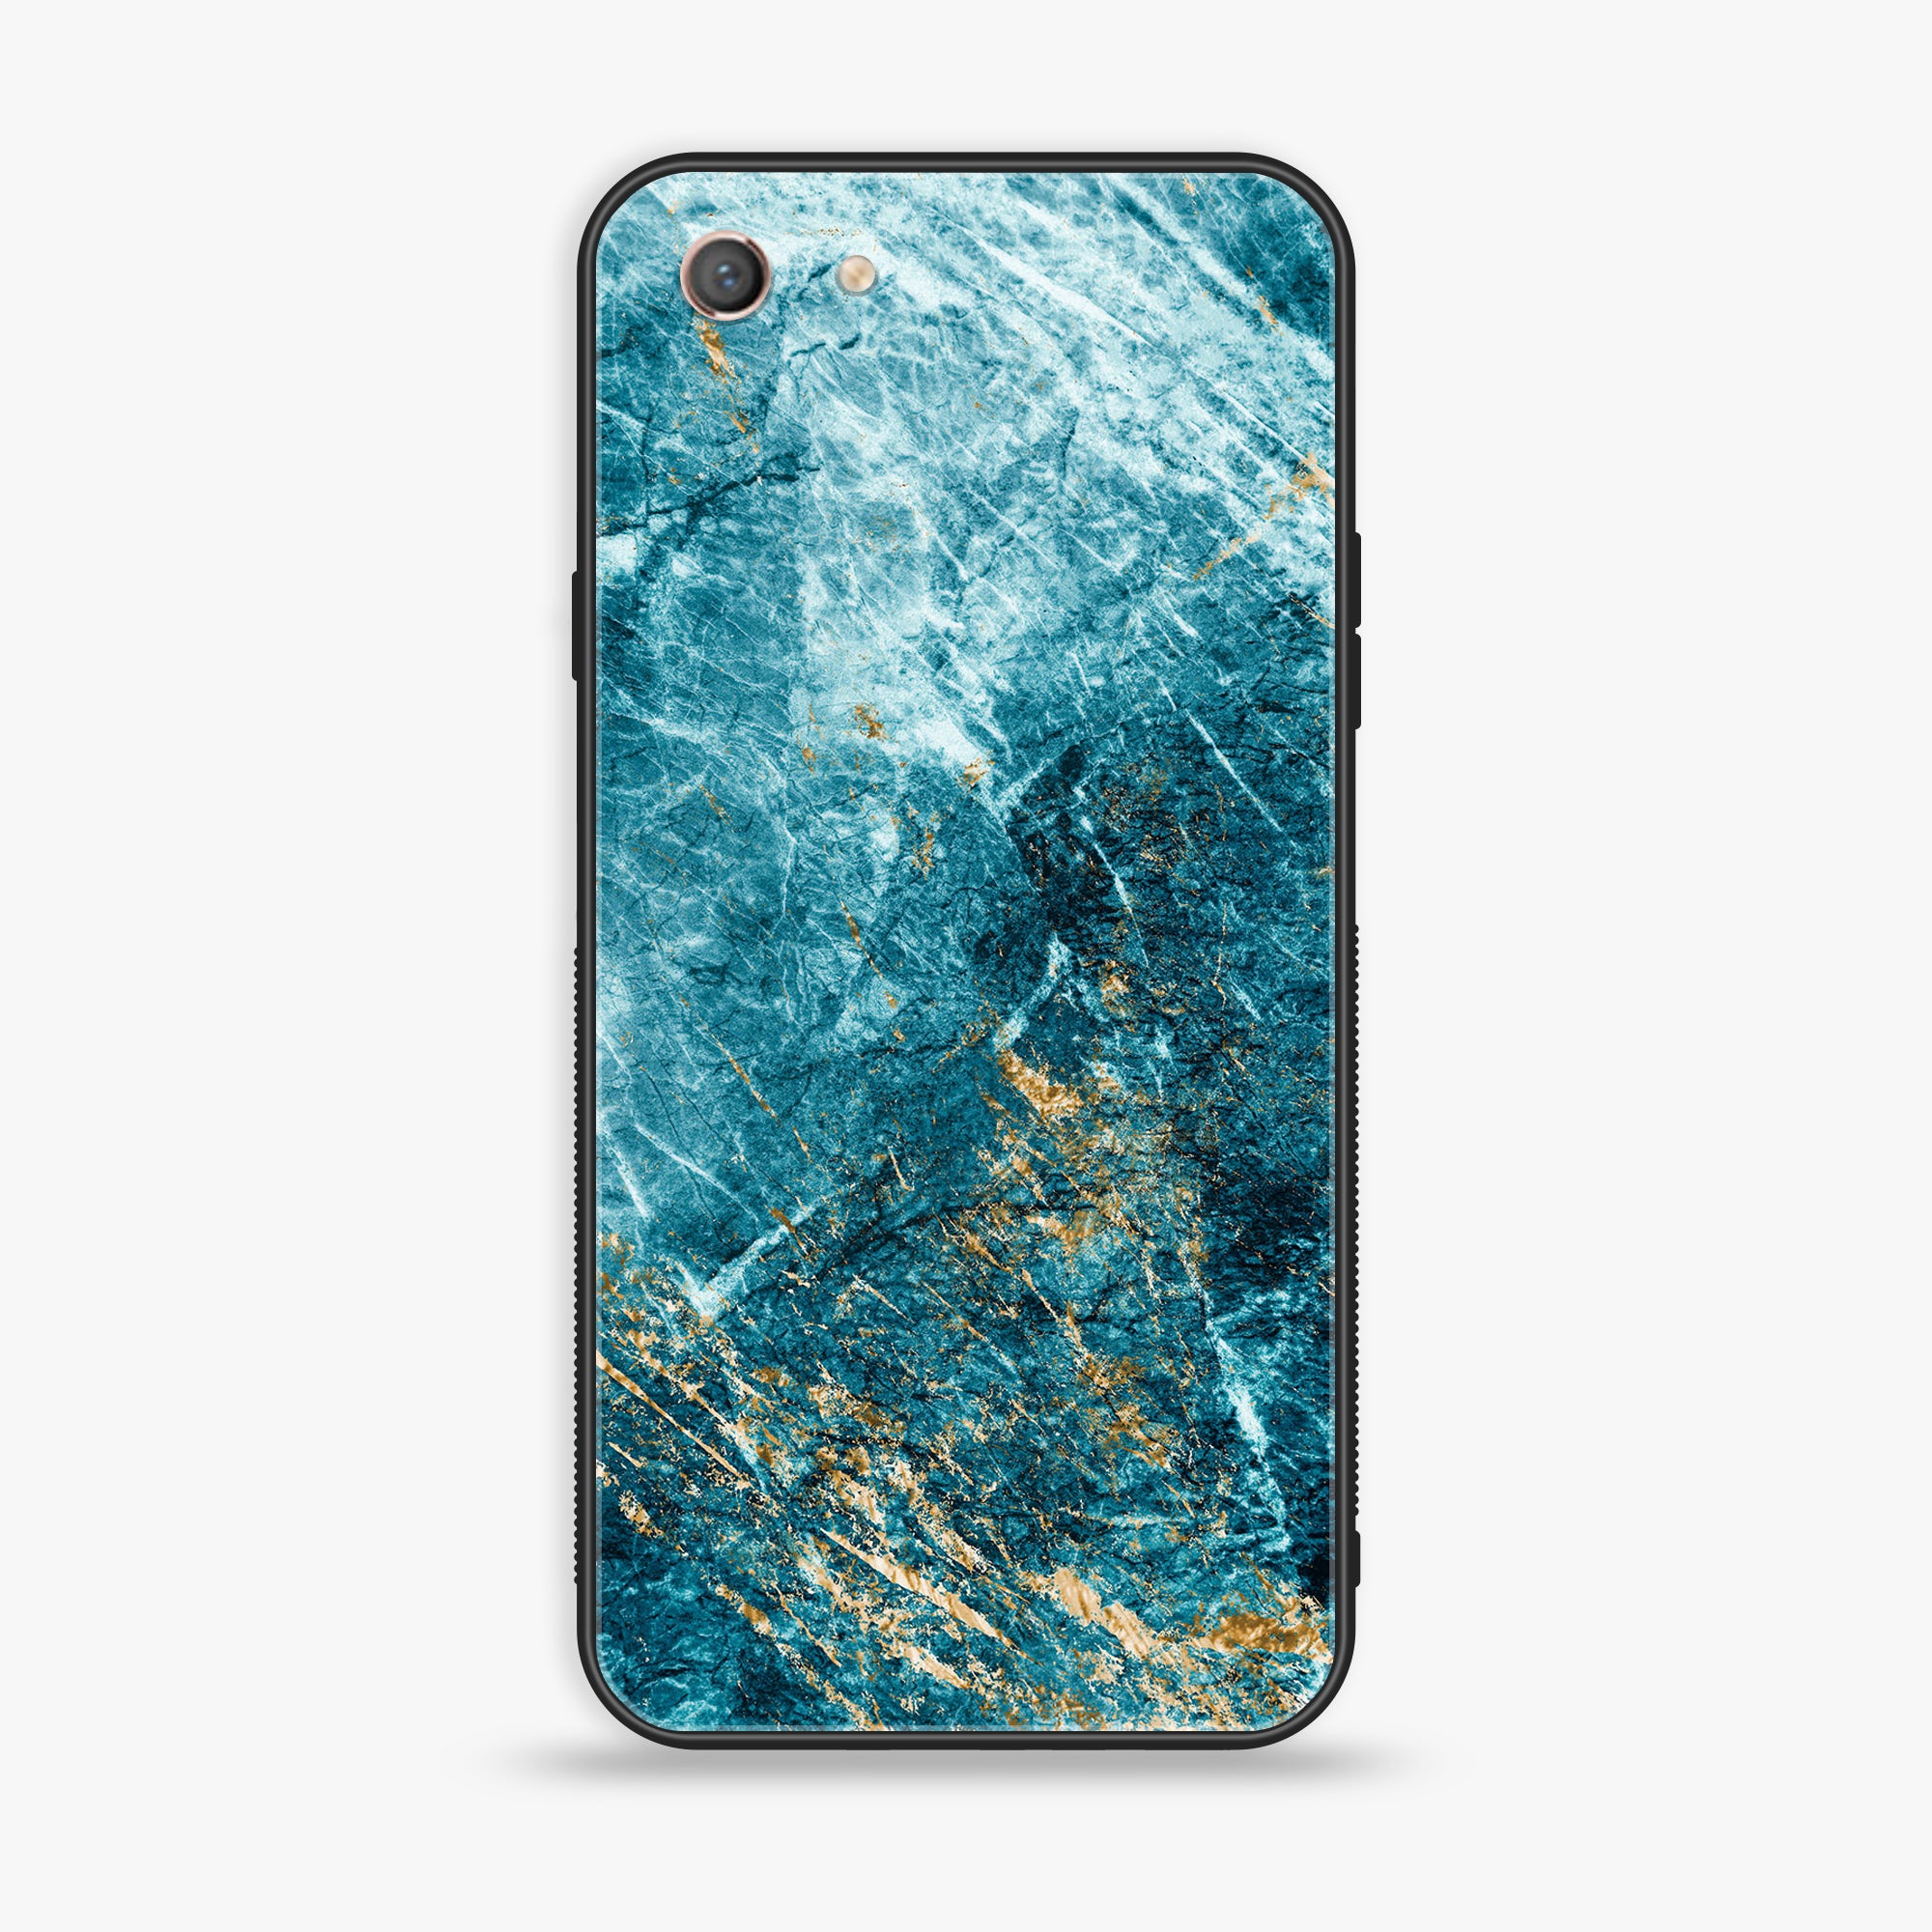 Oppo A71 (2017)  - Blue Marble 2.0 Series - Premium Printed Glass soft Bumper shock Proof Case